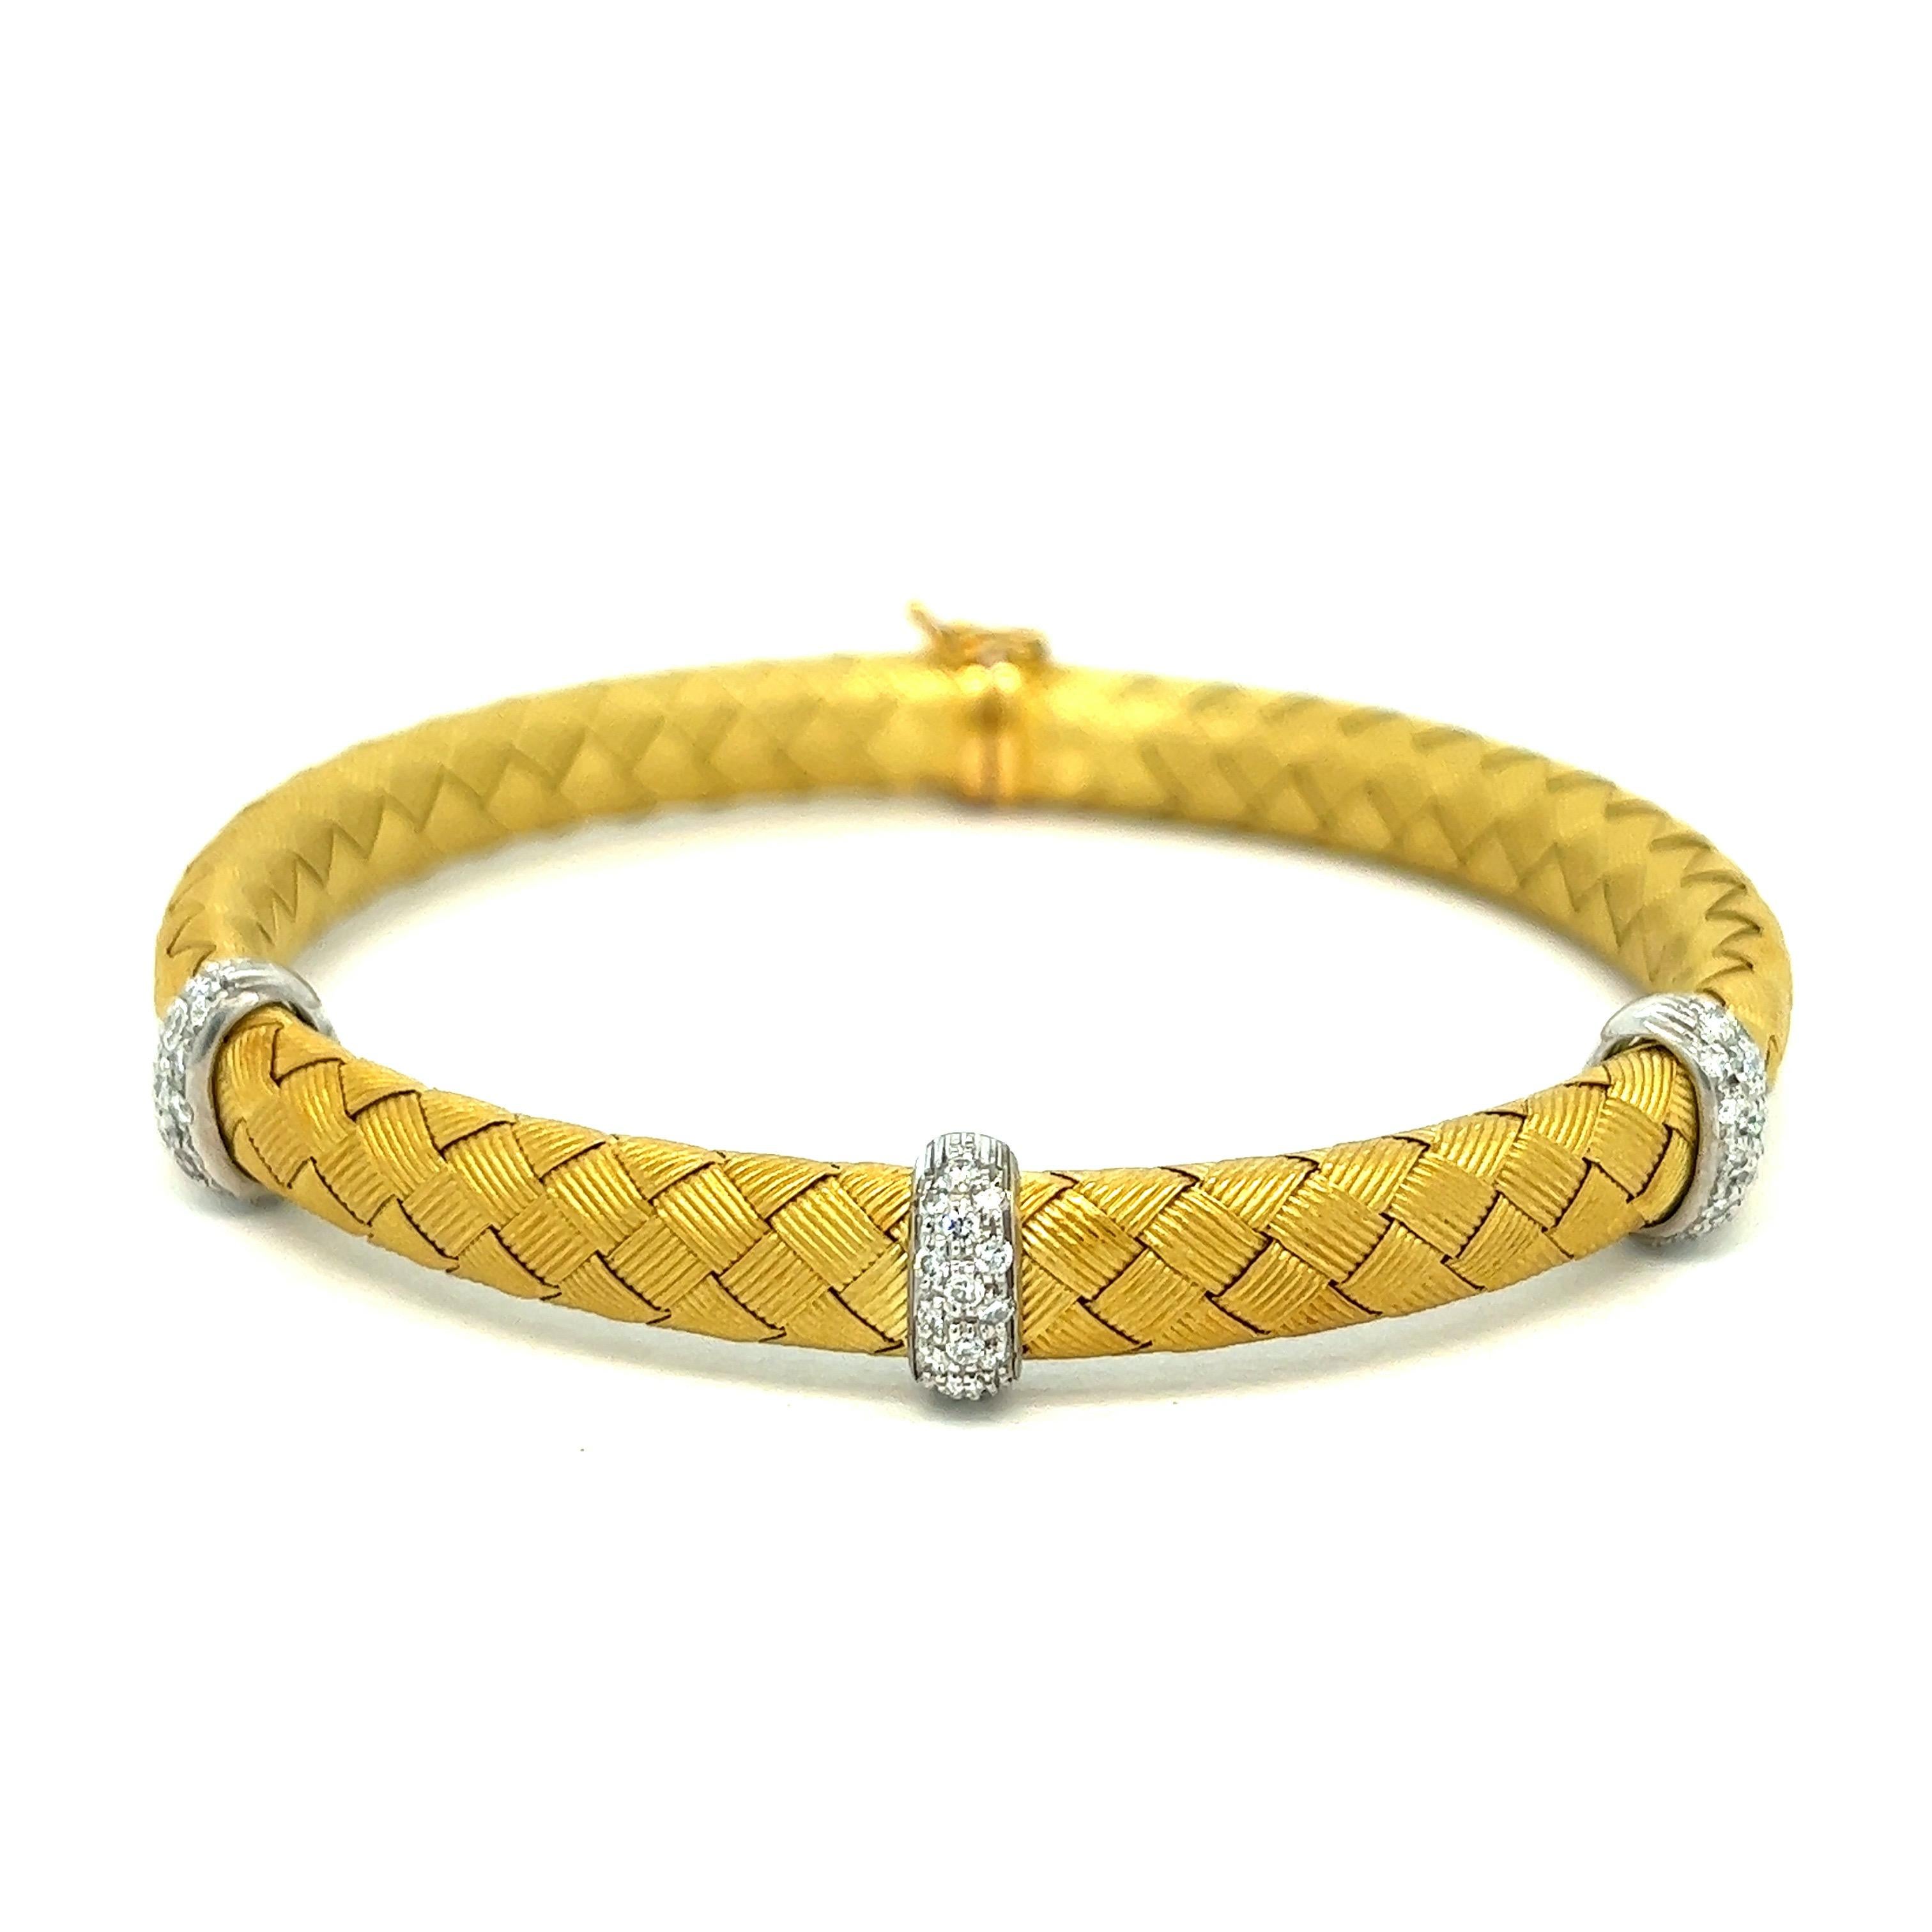 Roberto Coin 18k weave bracelet, made in Italy

Basket weave design, 18 karat yellow gold; marked 18k Italy

Size: width 0.31 inch, inner circumference 6.75 inches
Total weight: 26.1 grams